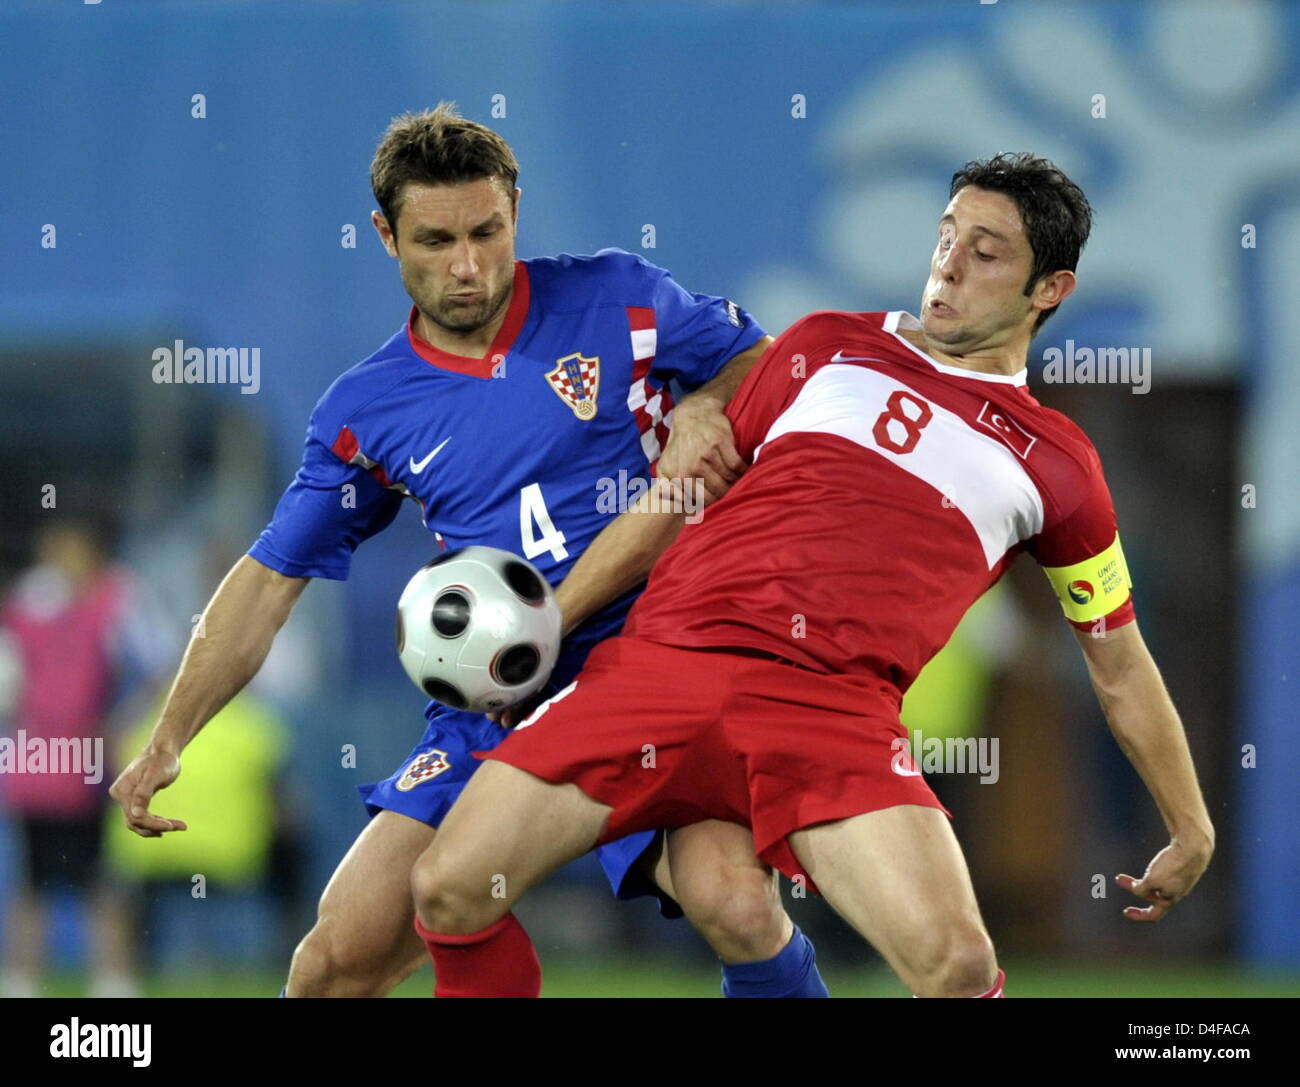 Robert Kovac (L) of Croatia vies with Nihat Kahveci of Turkey during the UEFA EURO 2008 quarter final match between Croatia and Turkey at the Ernst Happel stadium in Vienna, Austria, 20 June 2008. Turkey won 3:1 in penalty shootout. Photo: Achim Scheidemann dpa +please note UEFA restrictions particulary in regard to slide shows and ÒNo Mobile ServicesÒ +++###dpa###+++ Stock Photo